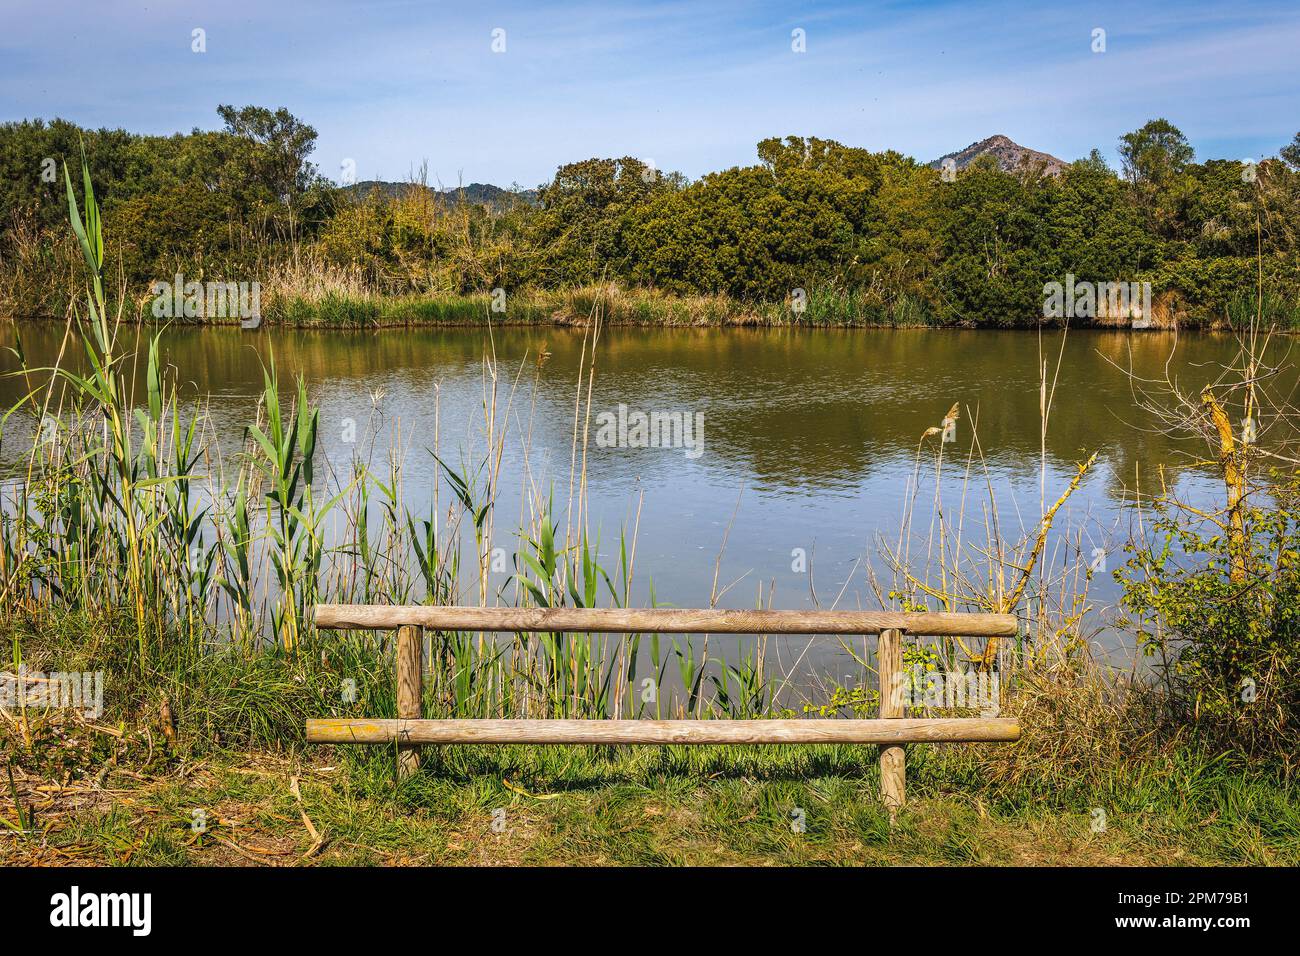 Rural scene of an old wooden fence on a water channel Stock Photo